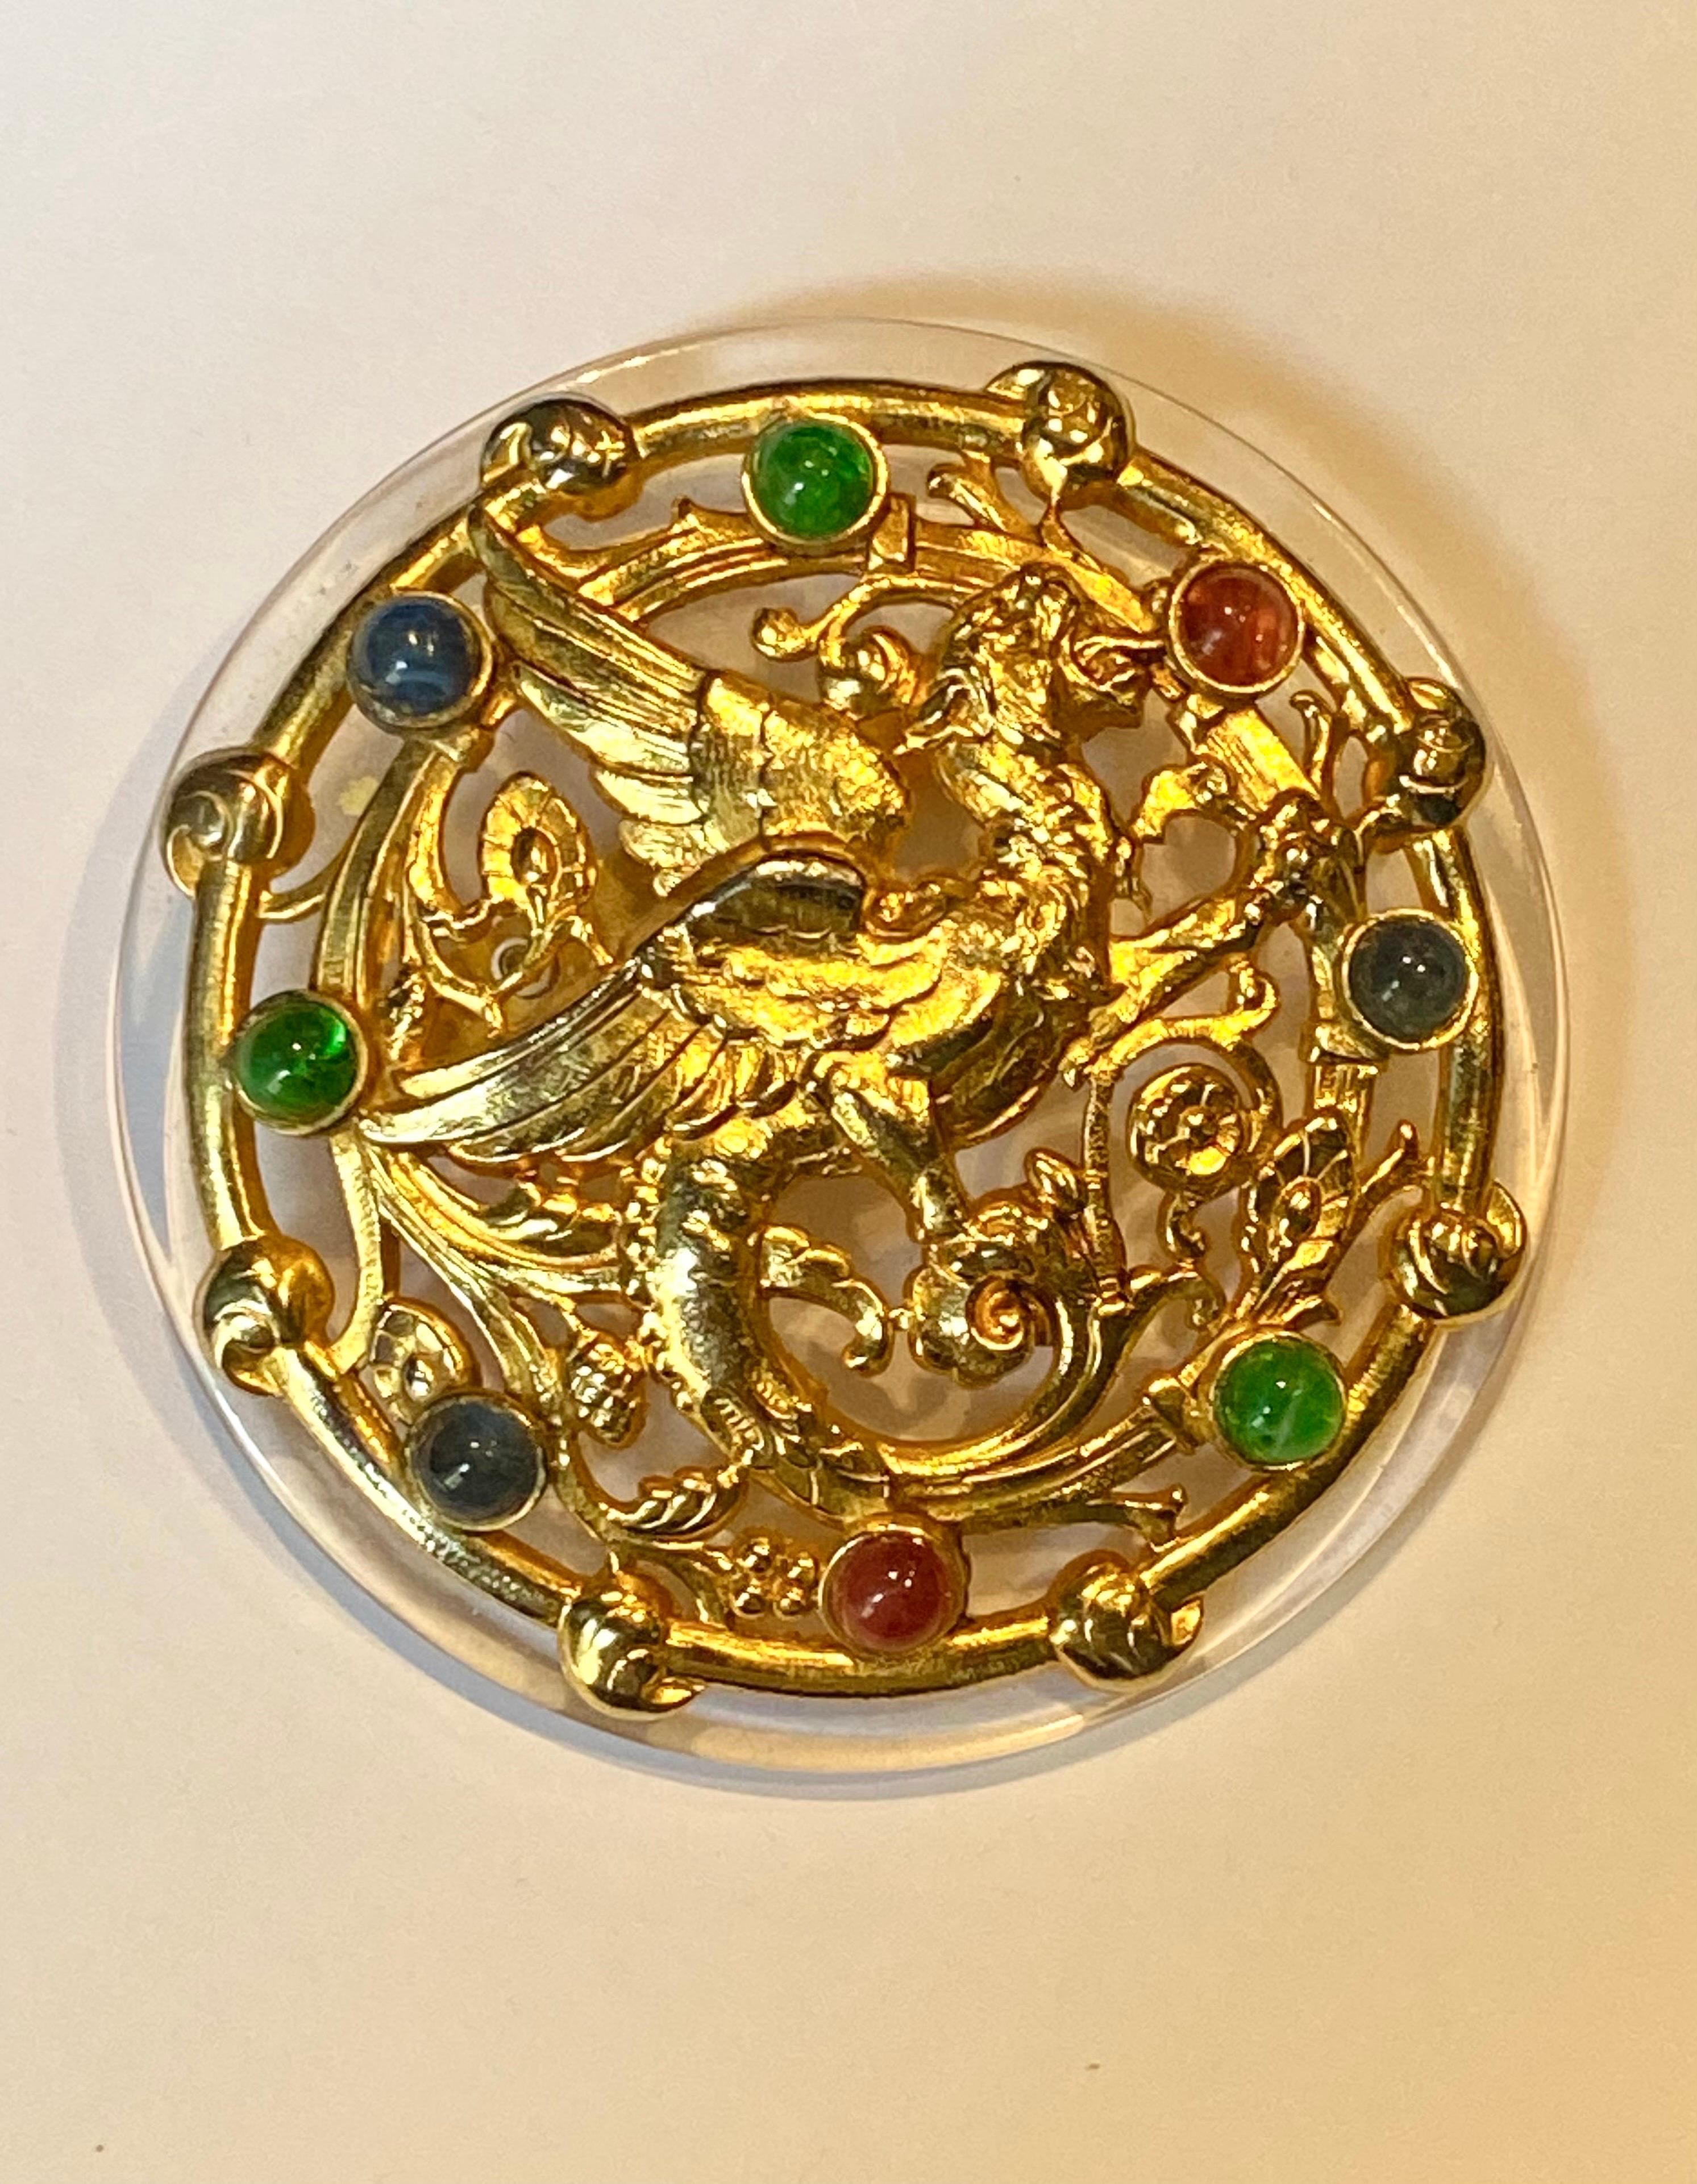 Gianfranco Ferre 1980s Classical Jeweled Griffin Brooch 8